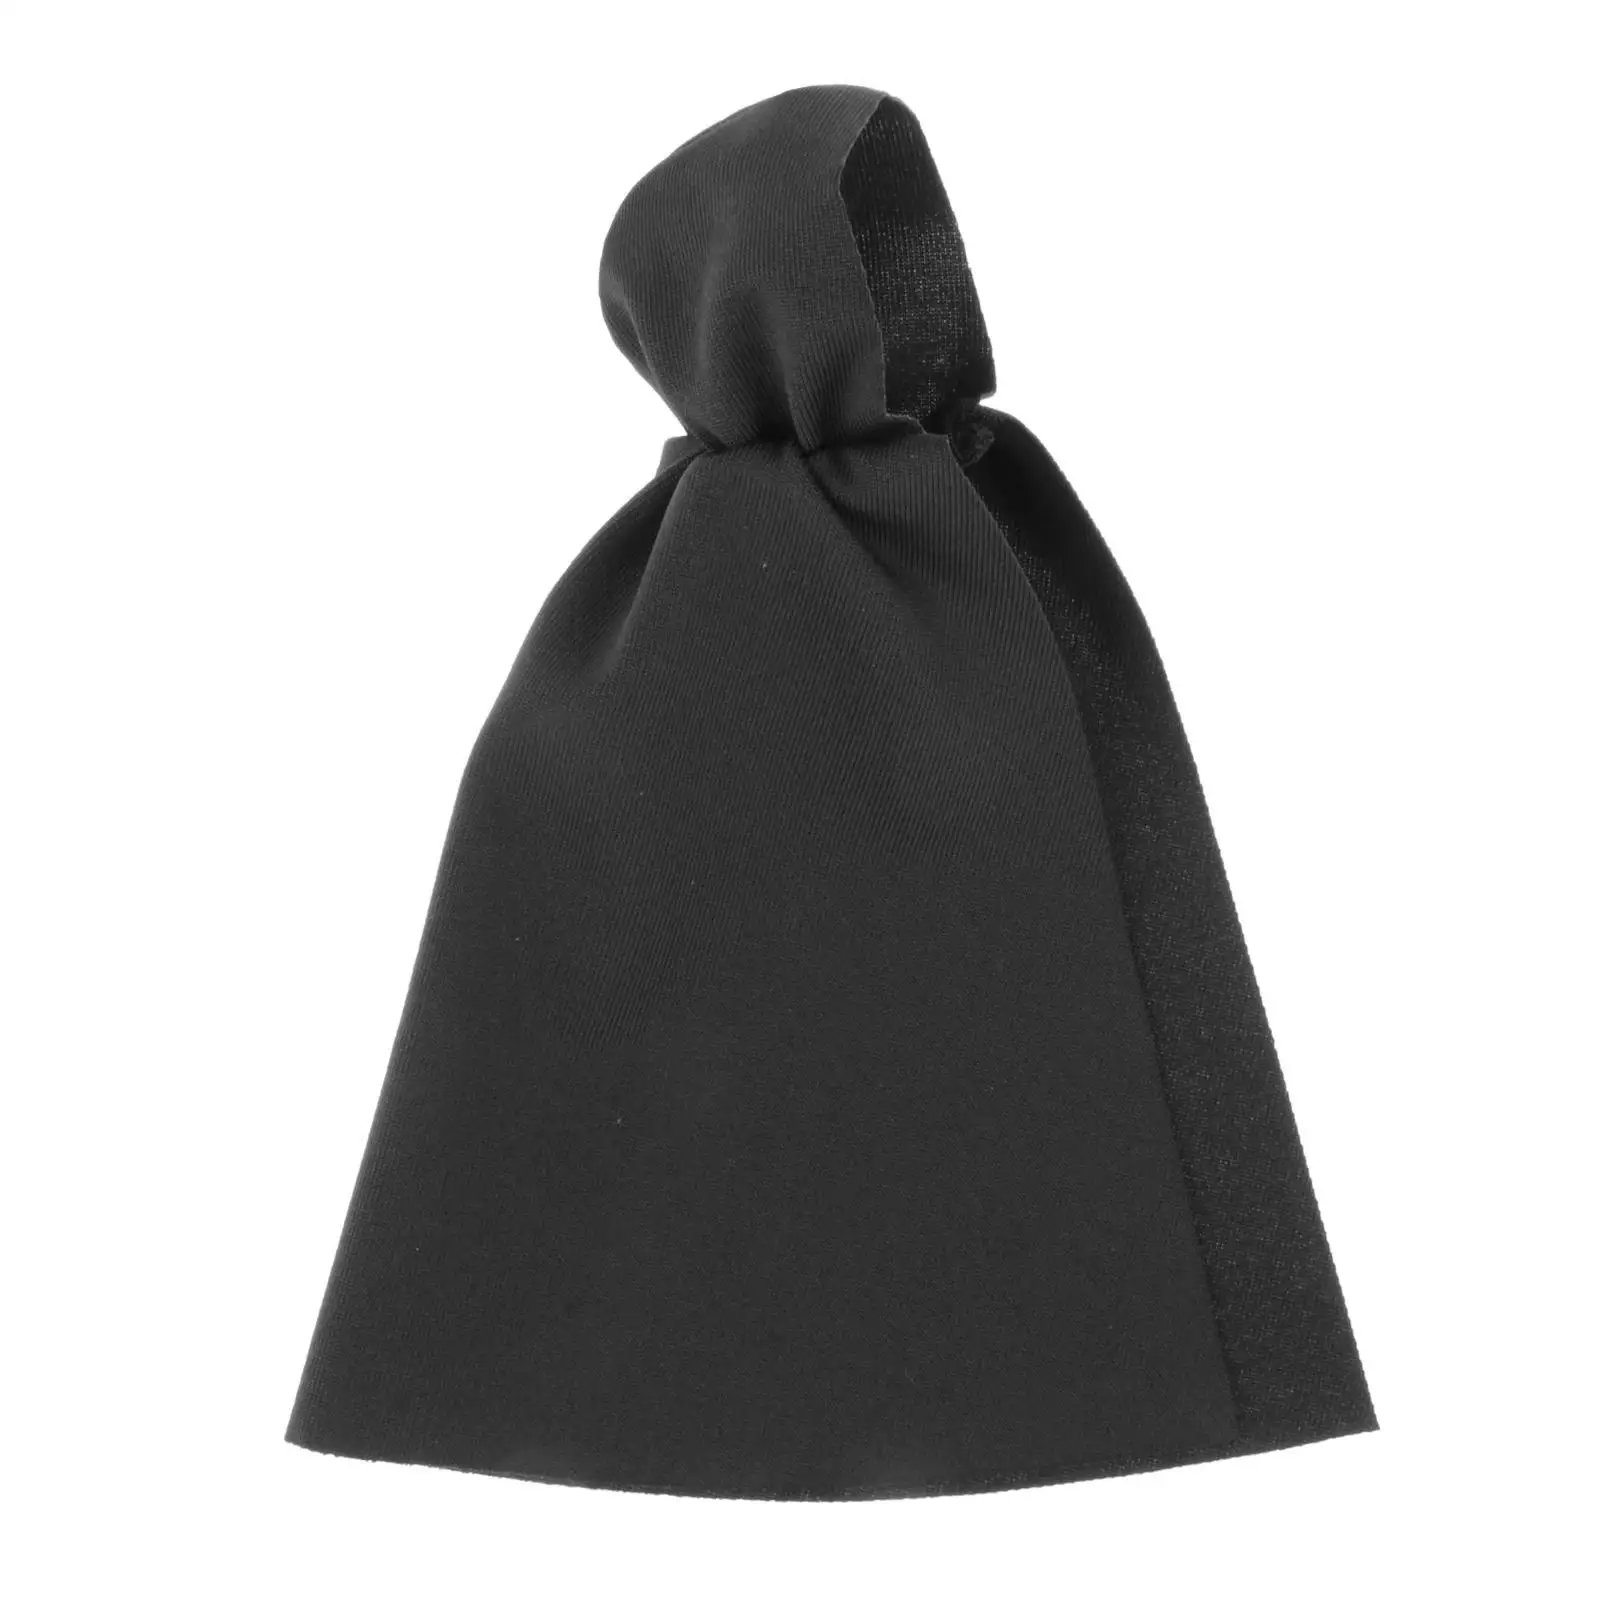 1:12 Scale Fabric Cape Cloak with Hat Retro Long Cape medieval Knights Cloak Soldier Clothes for 6inch Soldier Figure Accessory